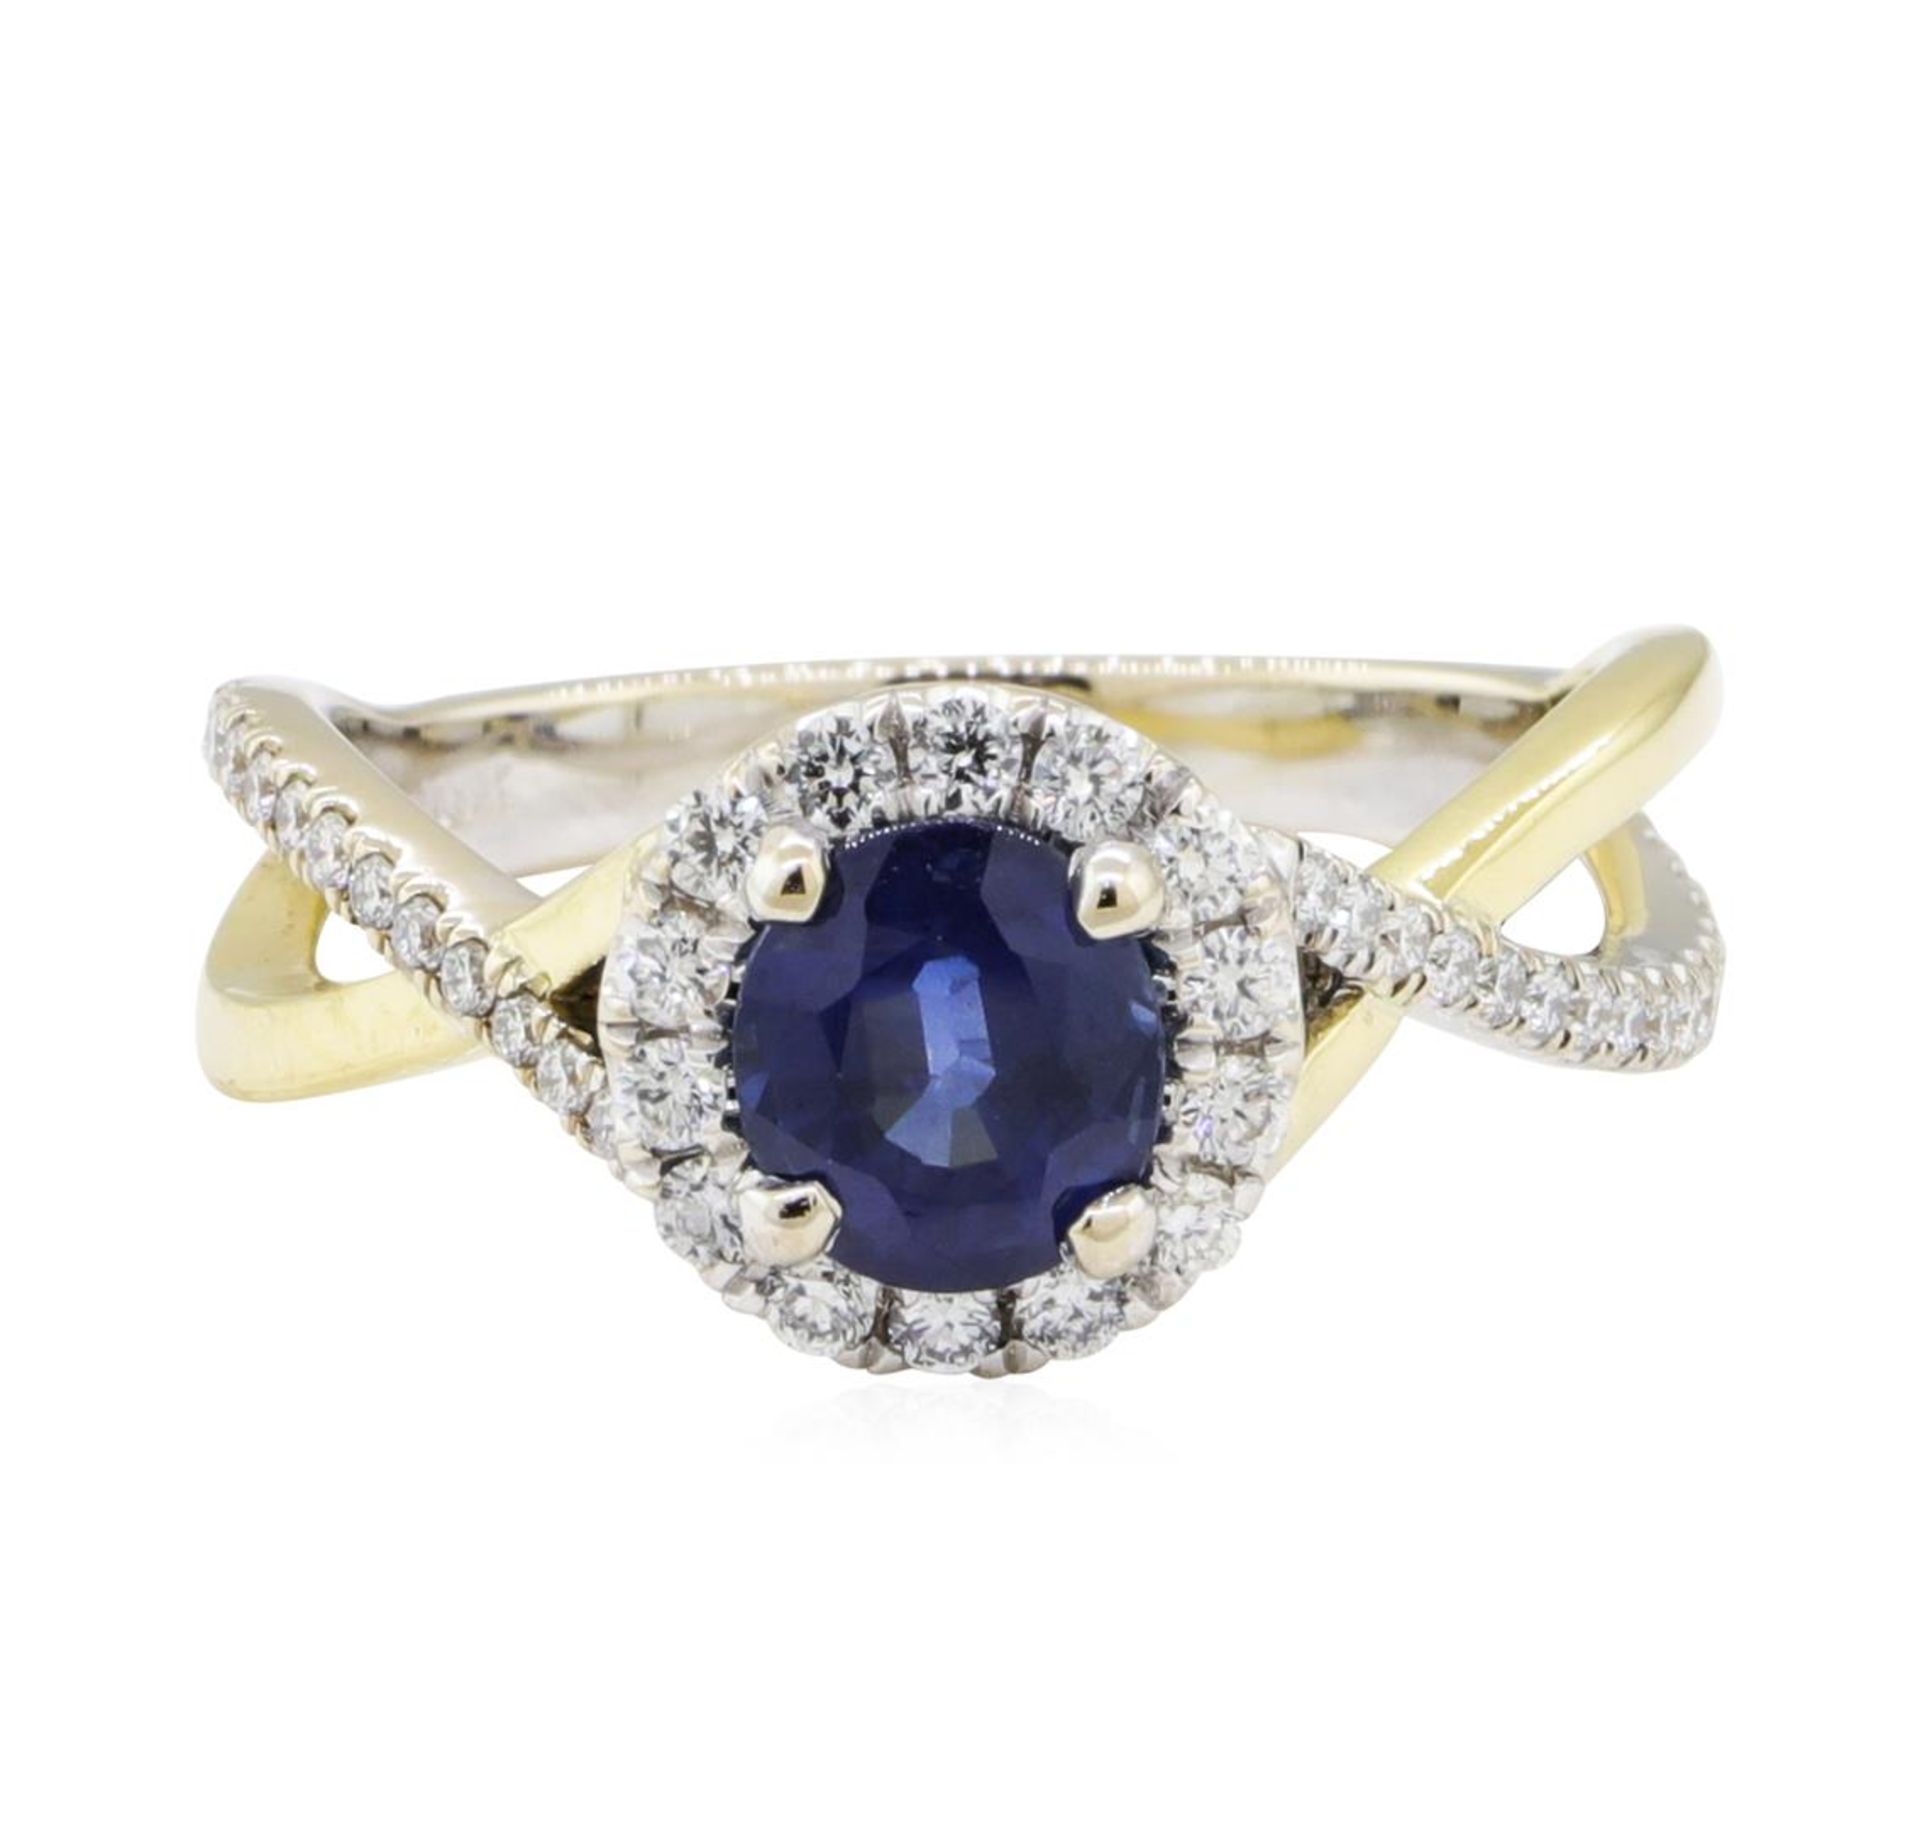 1.77 ctw Sapphire and Diamond Ring - 18KT White Gold - Image 2 of 5